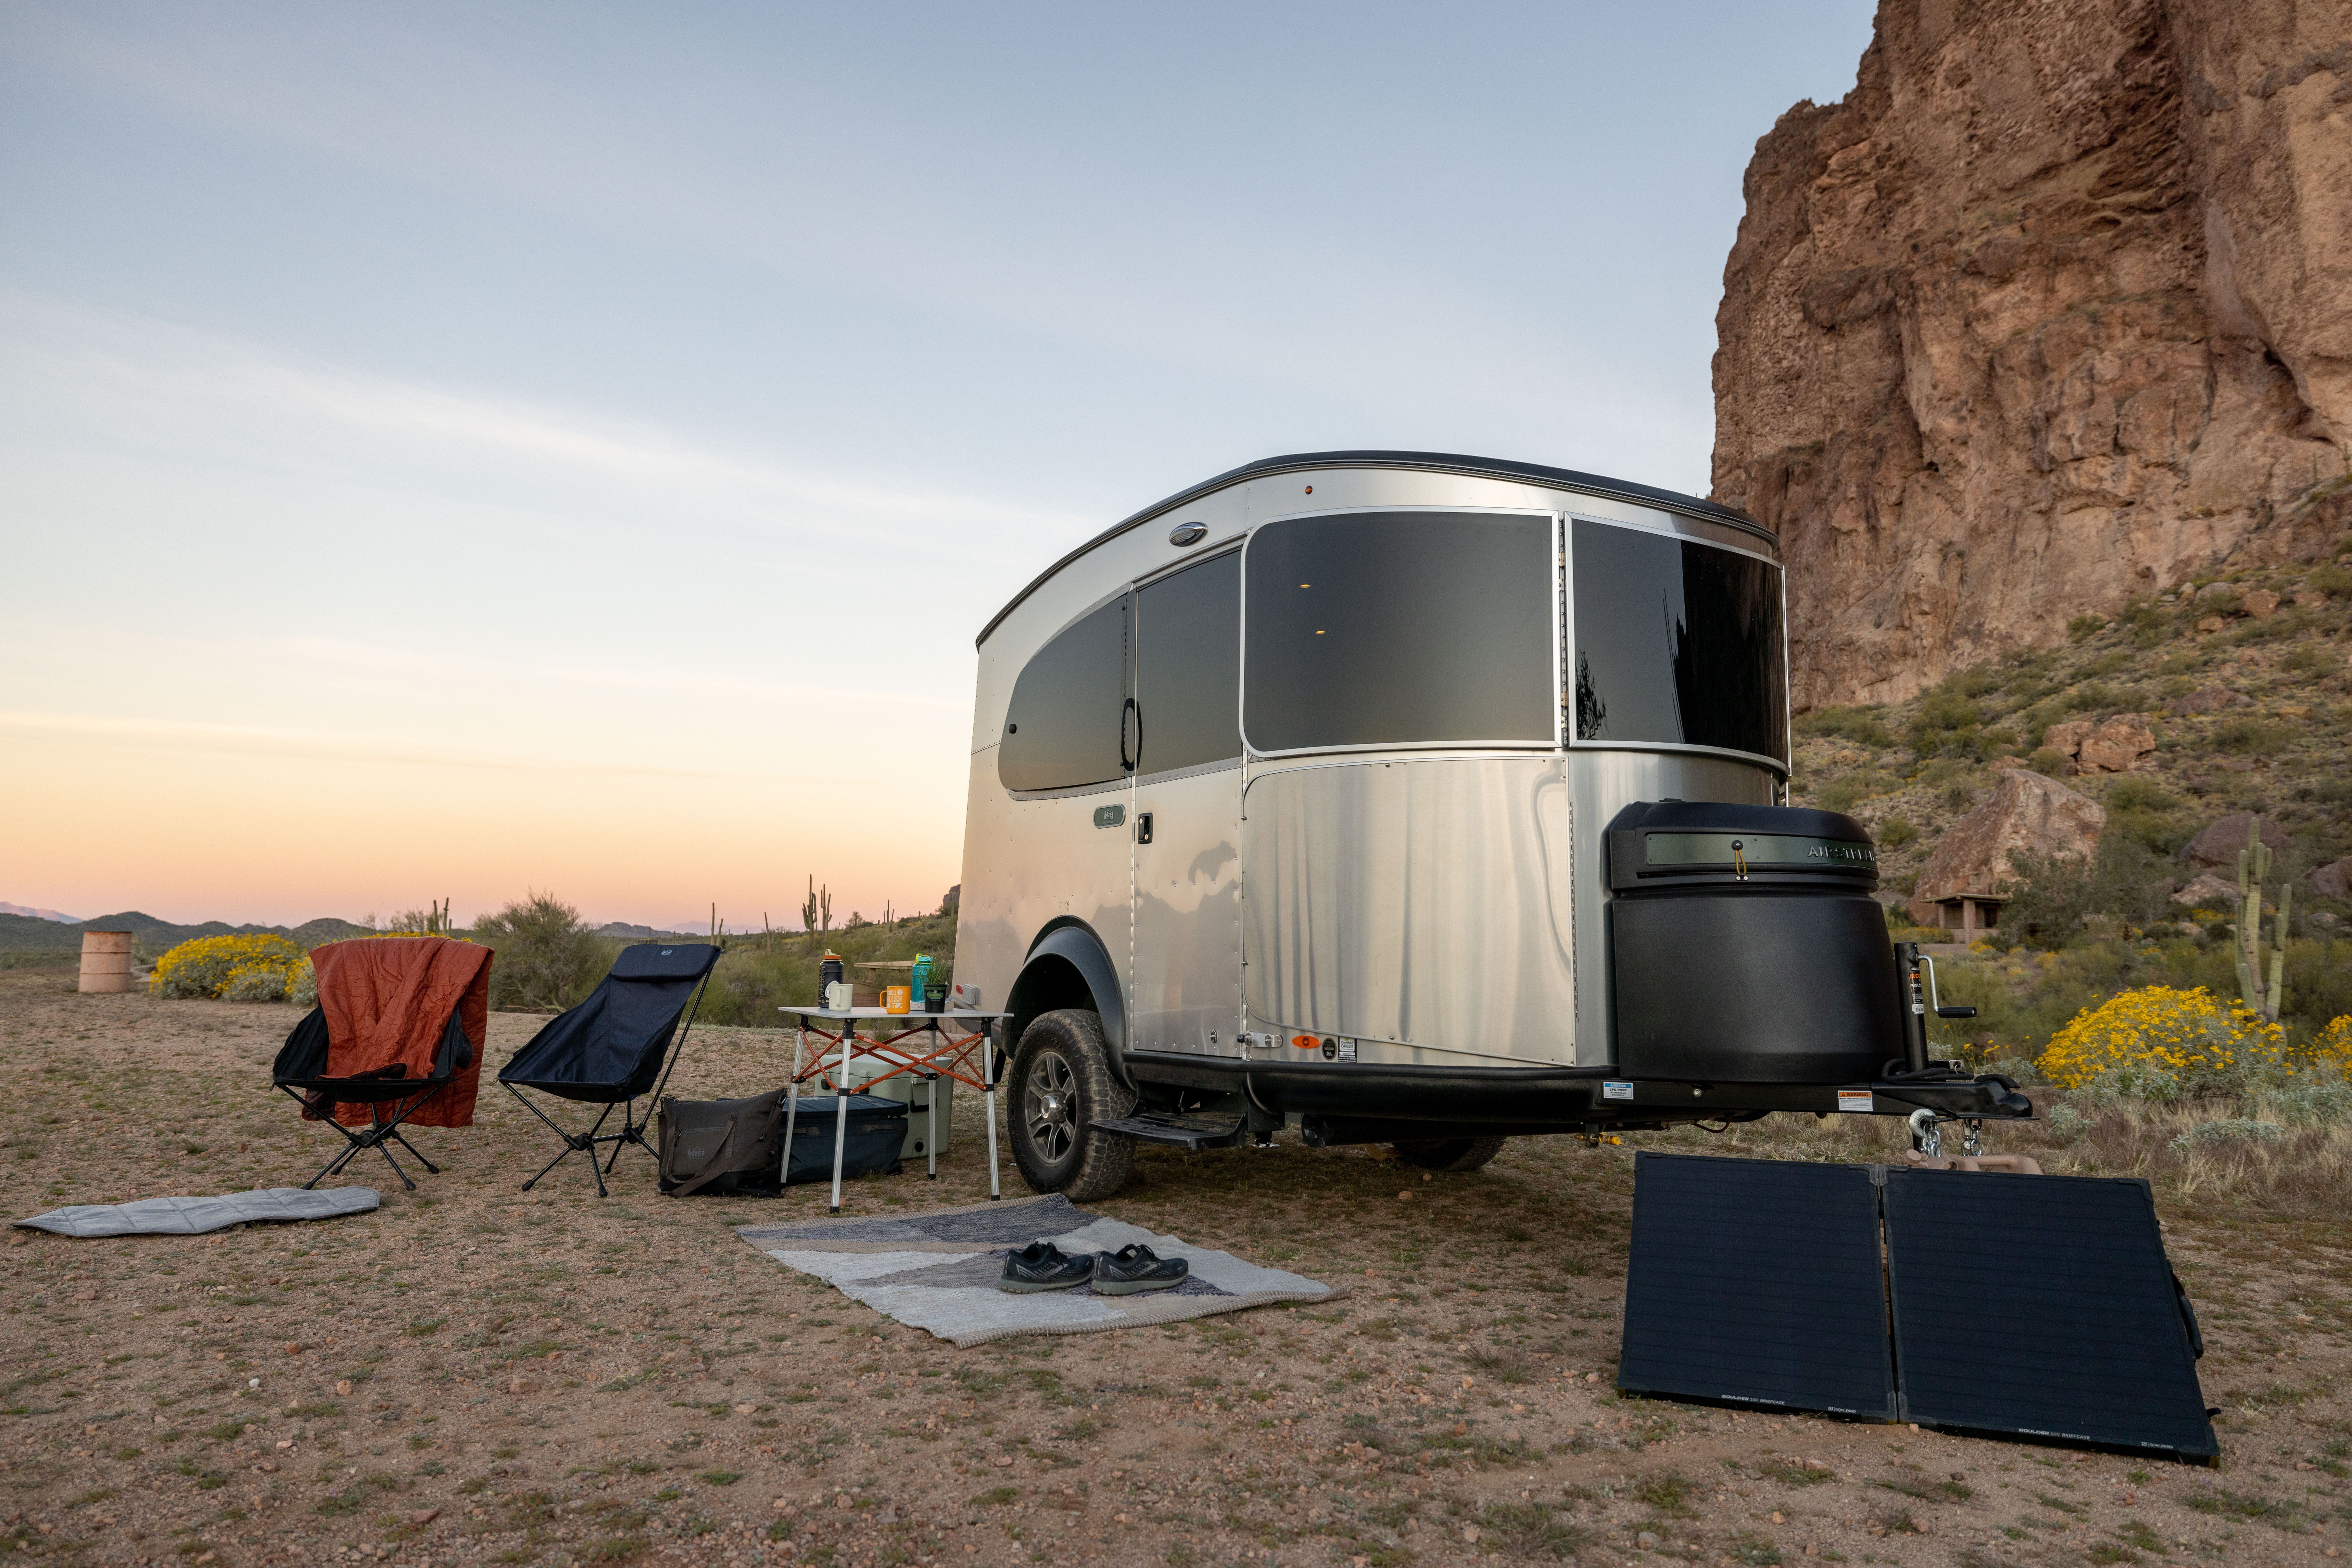 Airstream, REI Collaborate on Camper for Off-Grid Adventurers